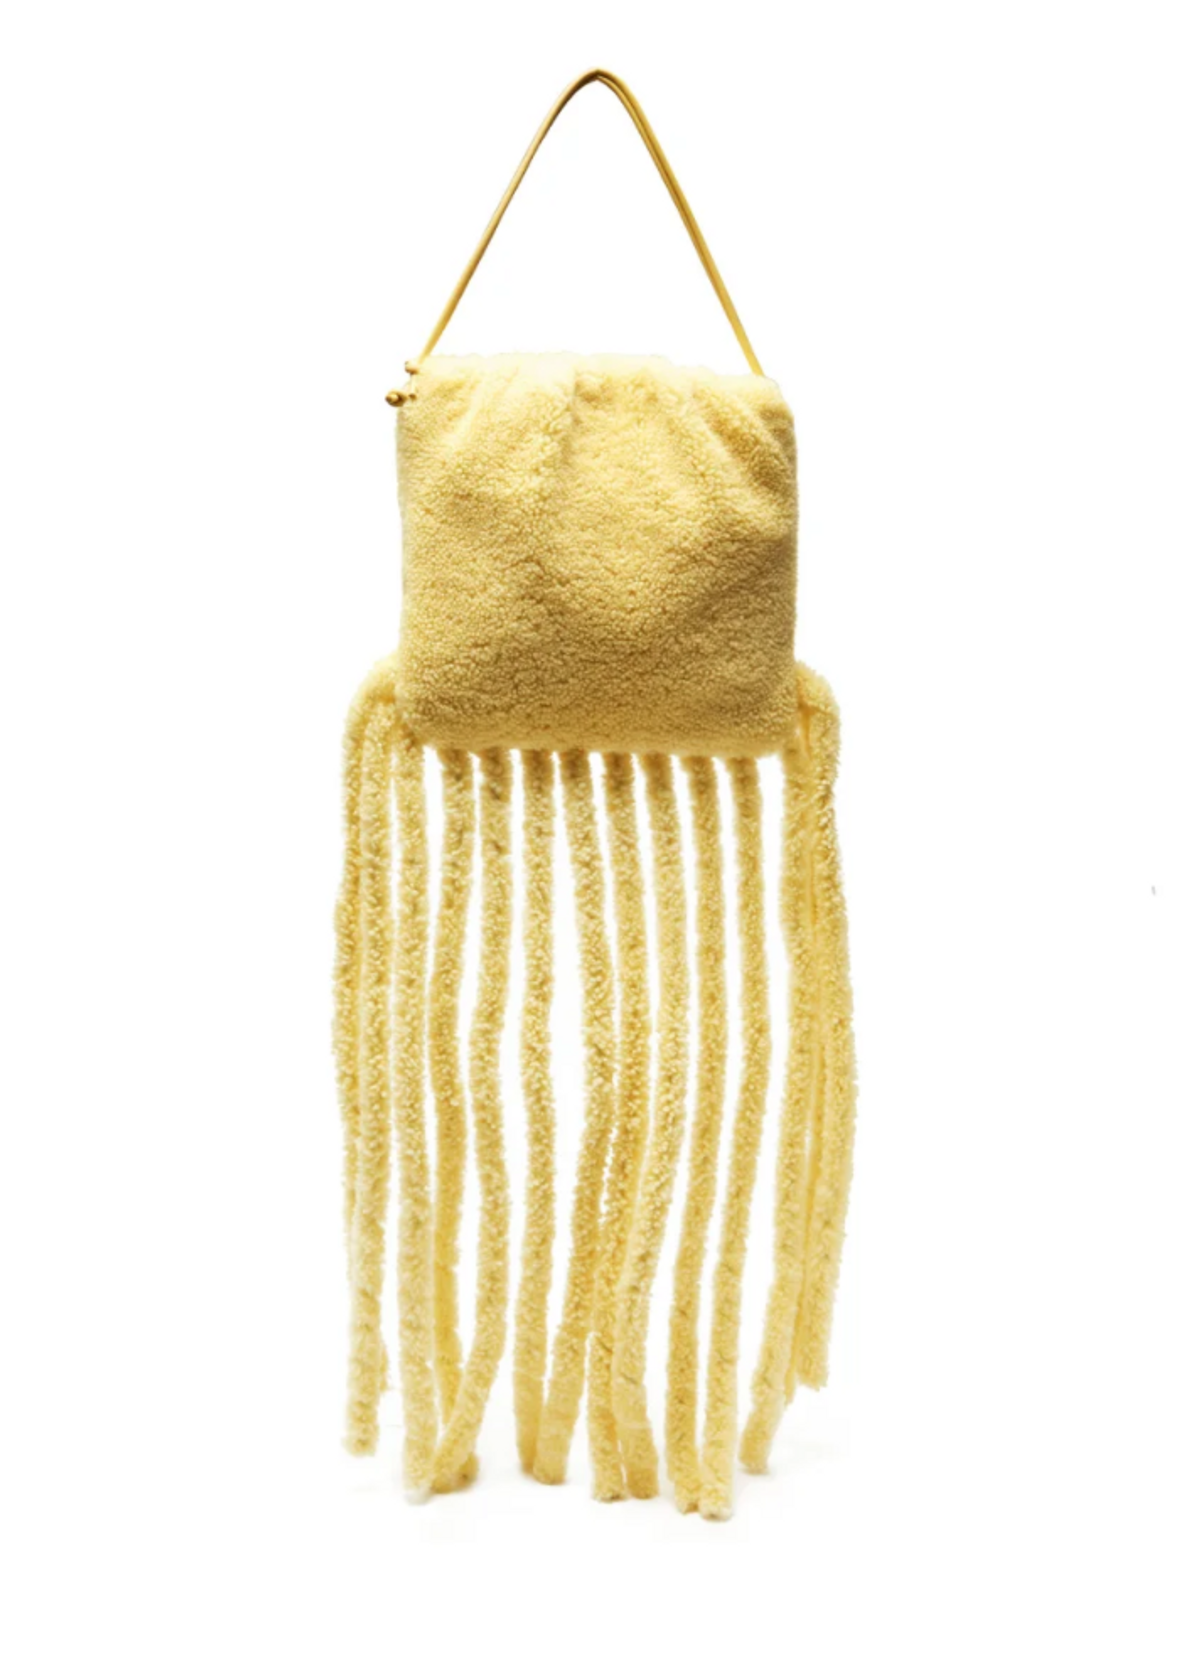 The Fringe Shearling Pouch